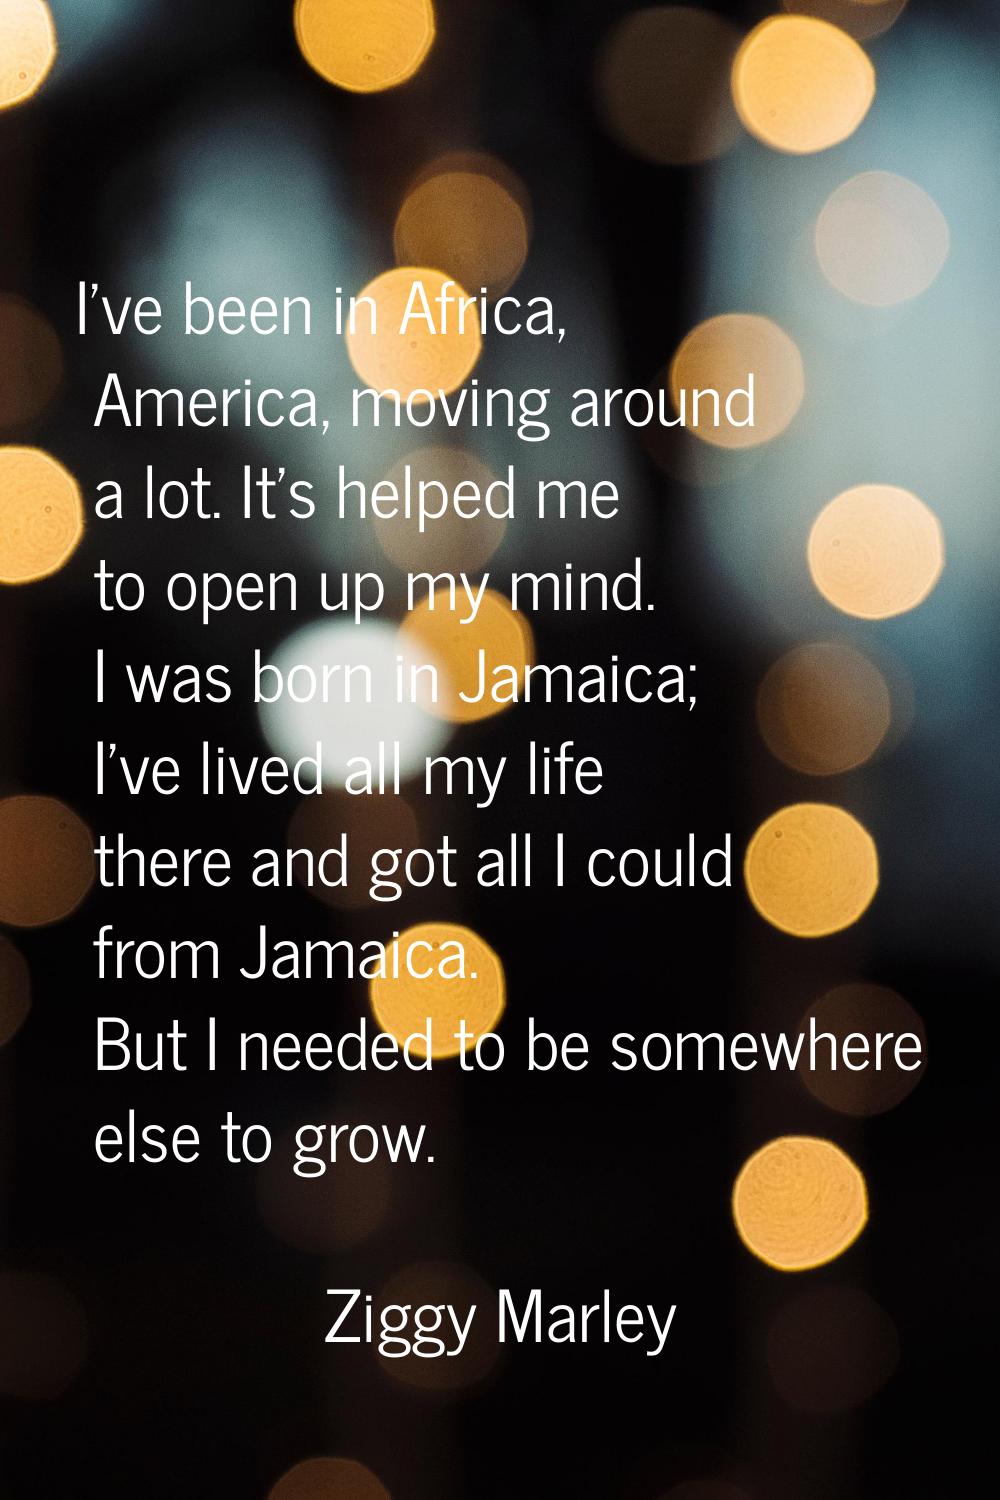 I've been in Africa, America, moving around a lot. It's helped me to open up my mind. I was born in